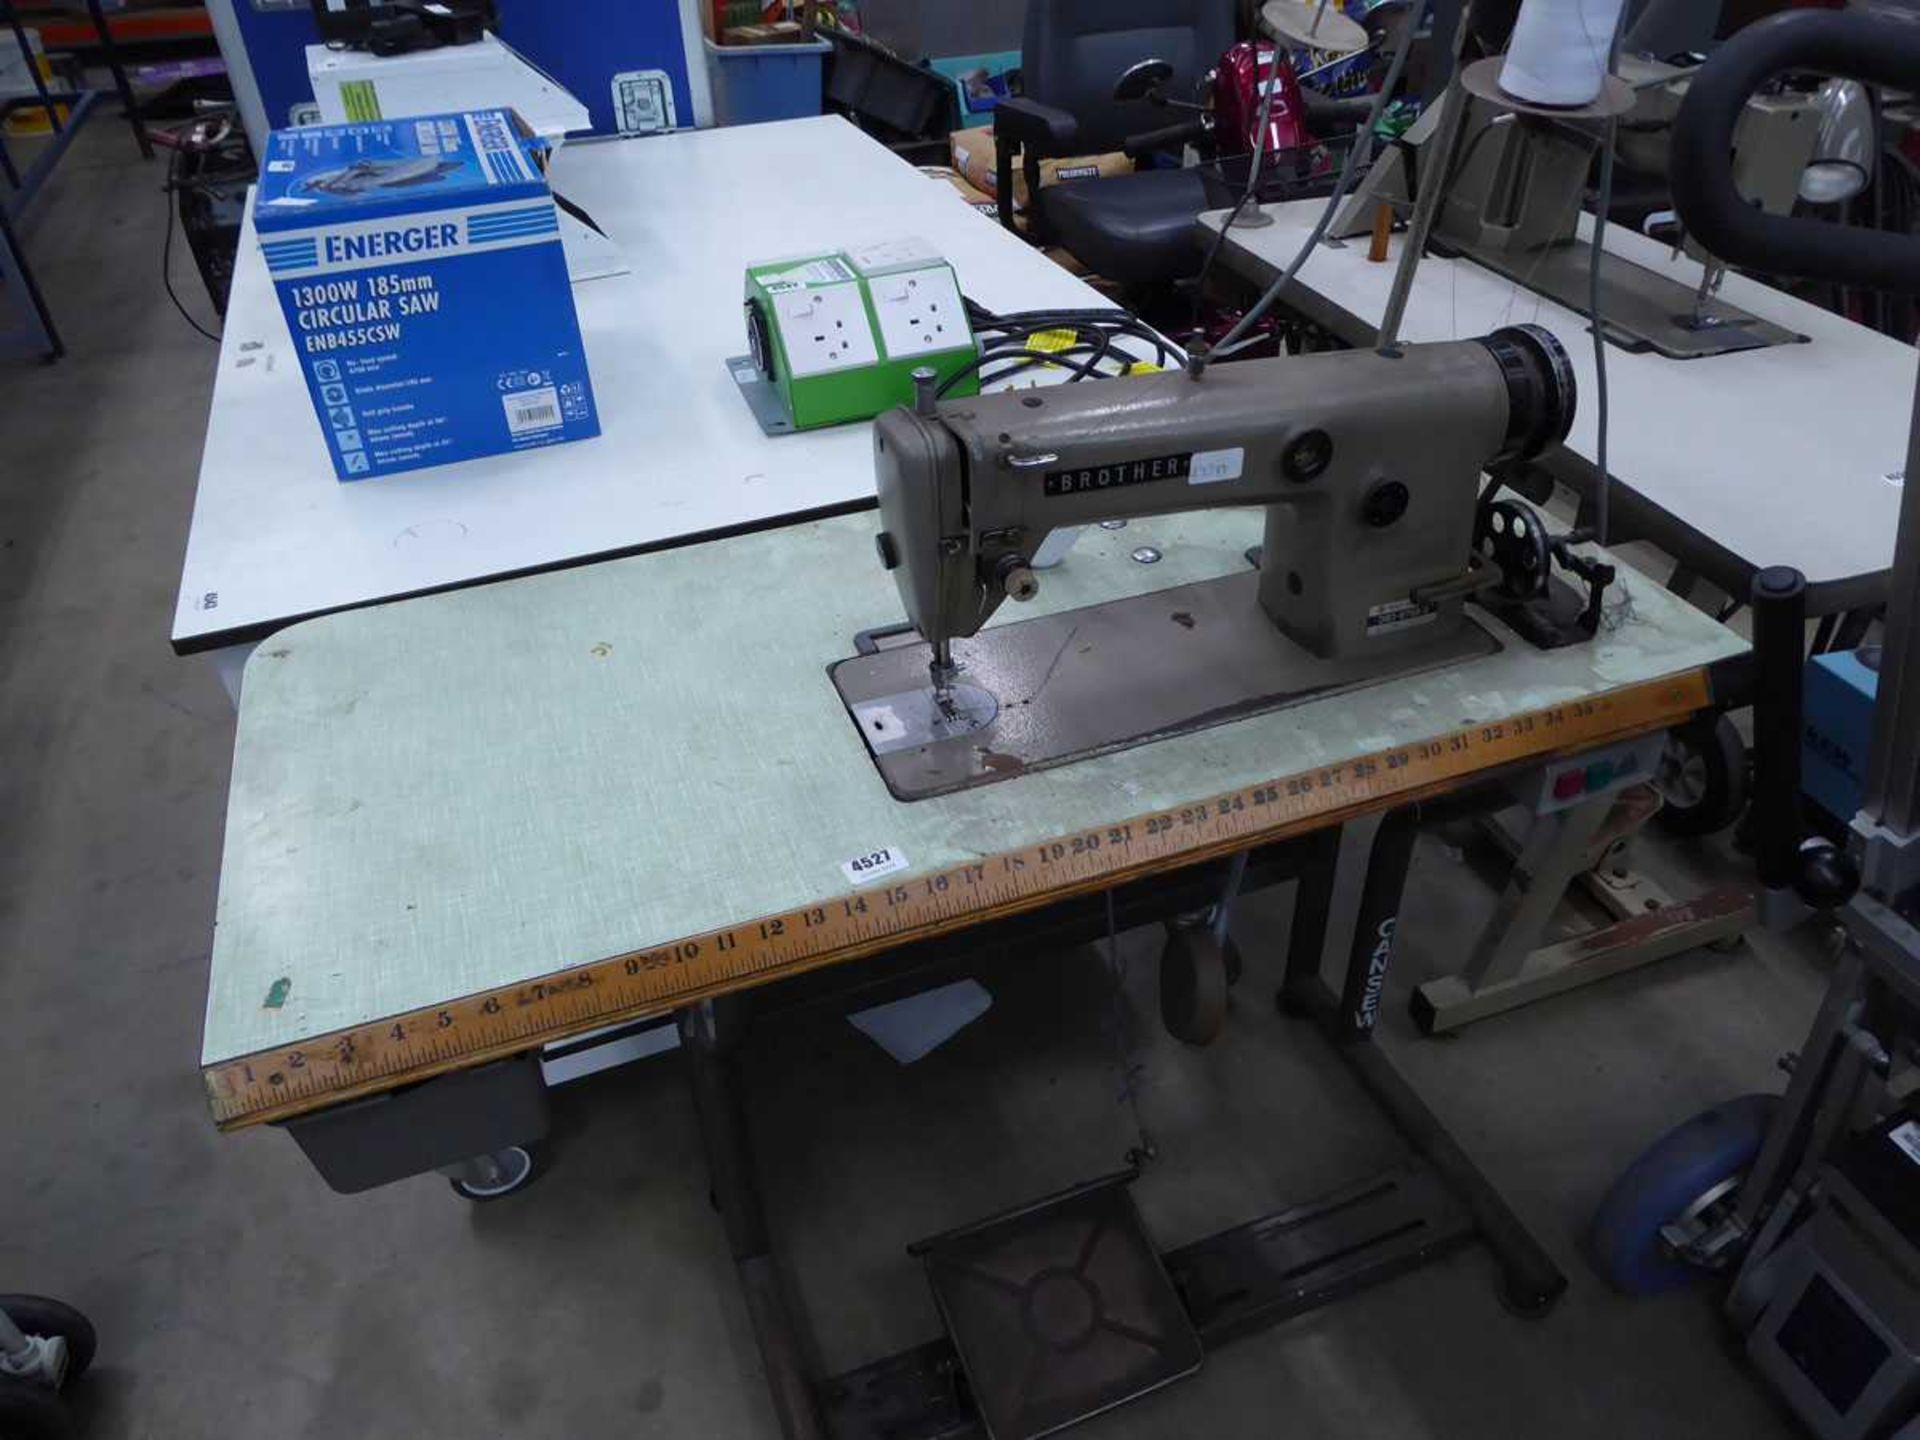 Brother industrial style sewing machine